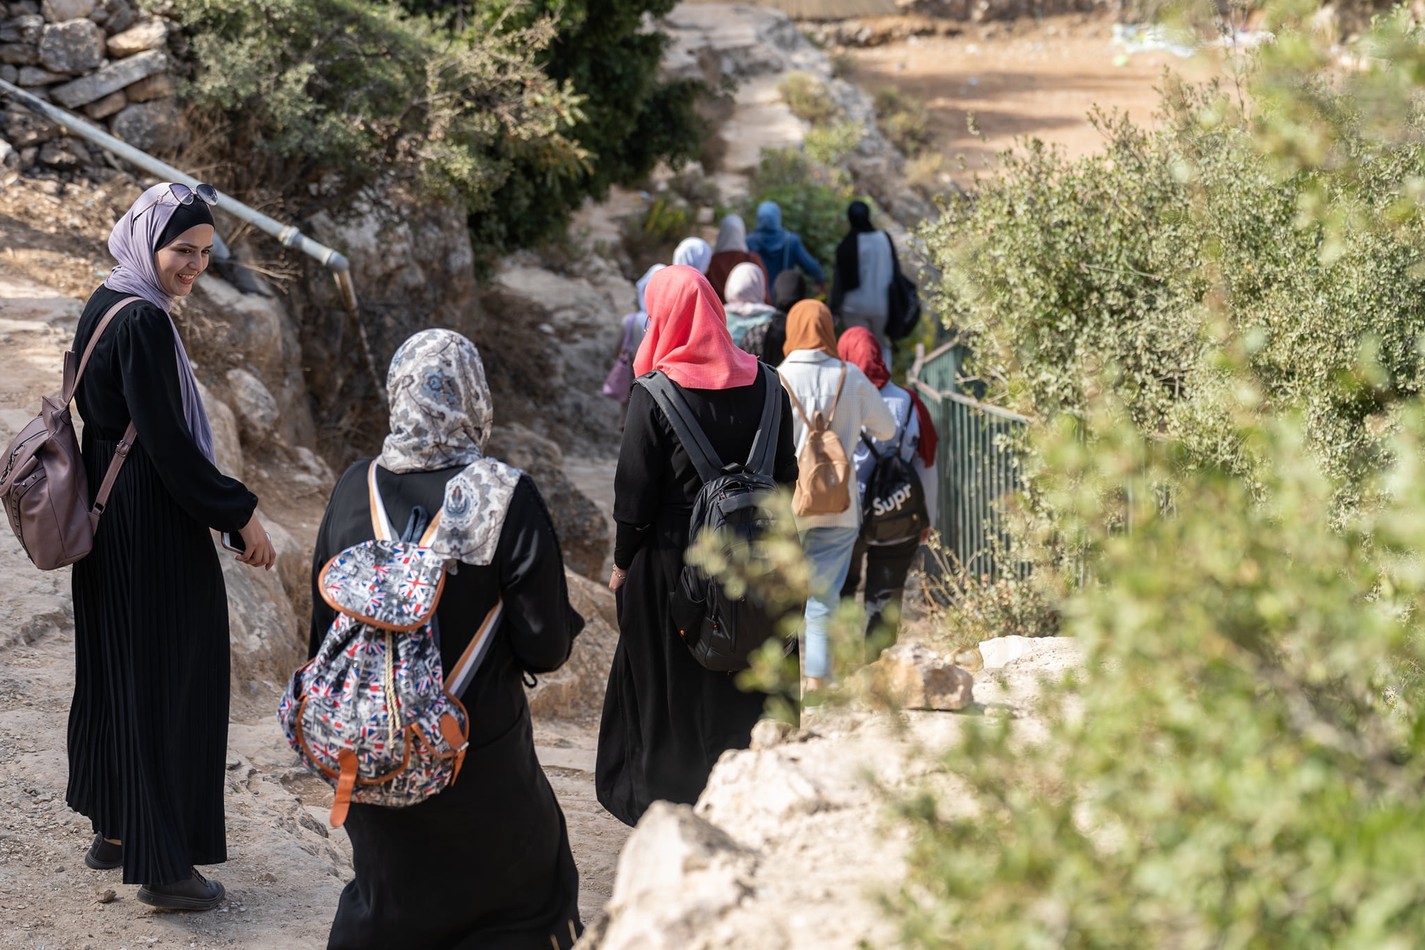 In Palestine the Walk & Talk initiative lets youth gather and learn about business while hiking